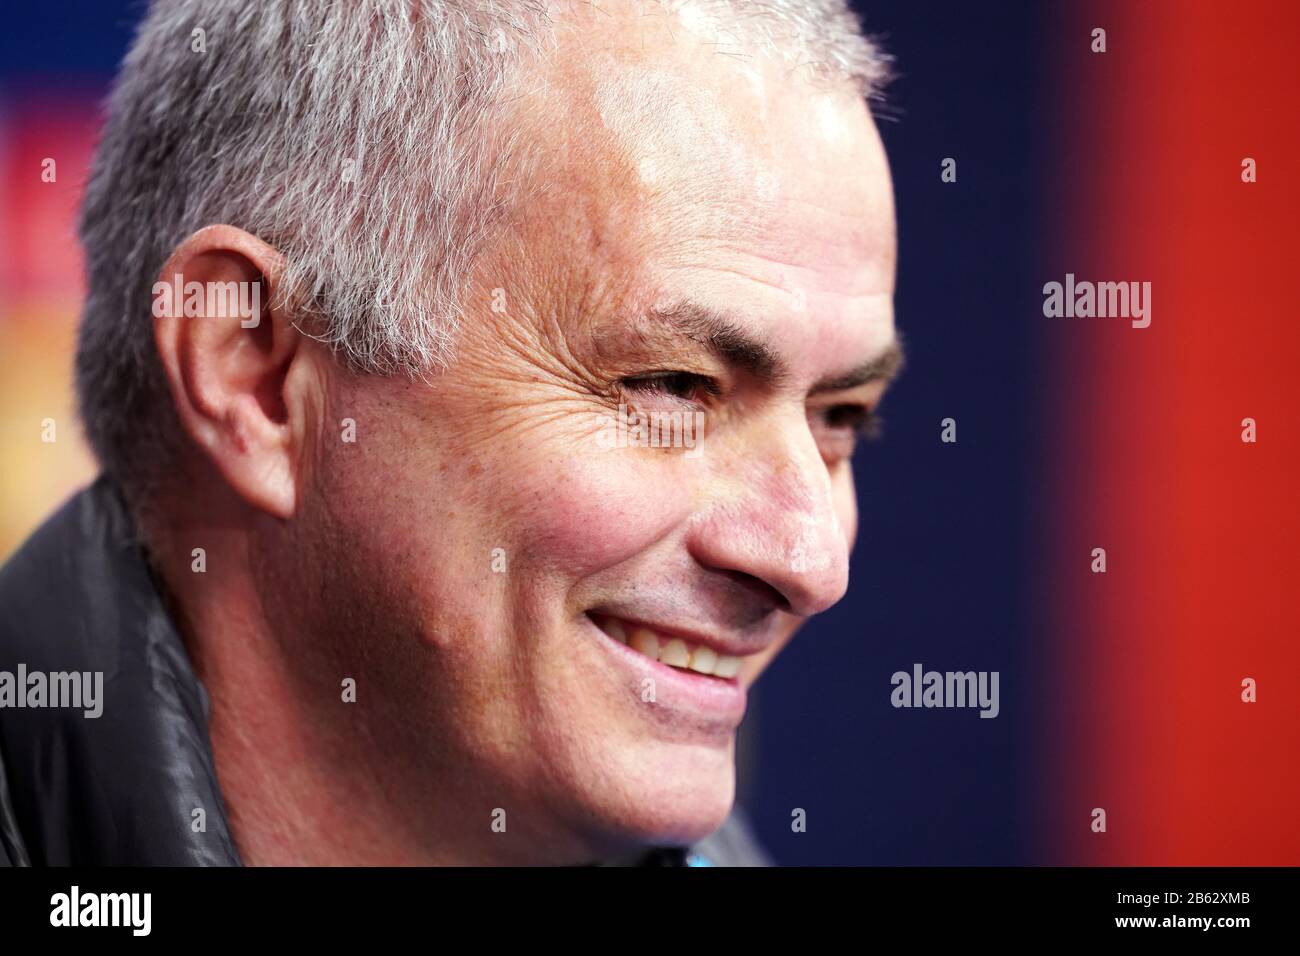 Tottenham Hotspur manager Jose Mourinho during the press conference at the Red Bull Arena, Leipzig. Stock Photo